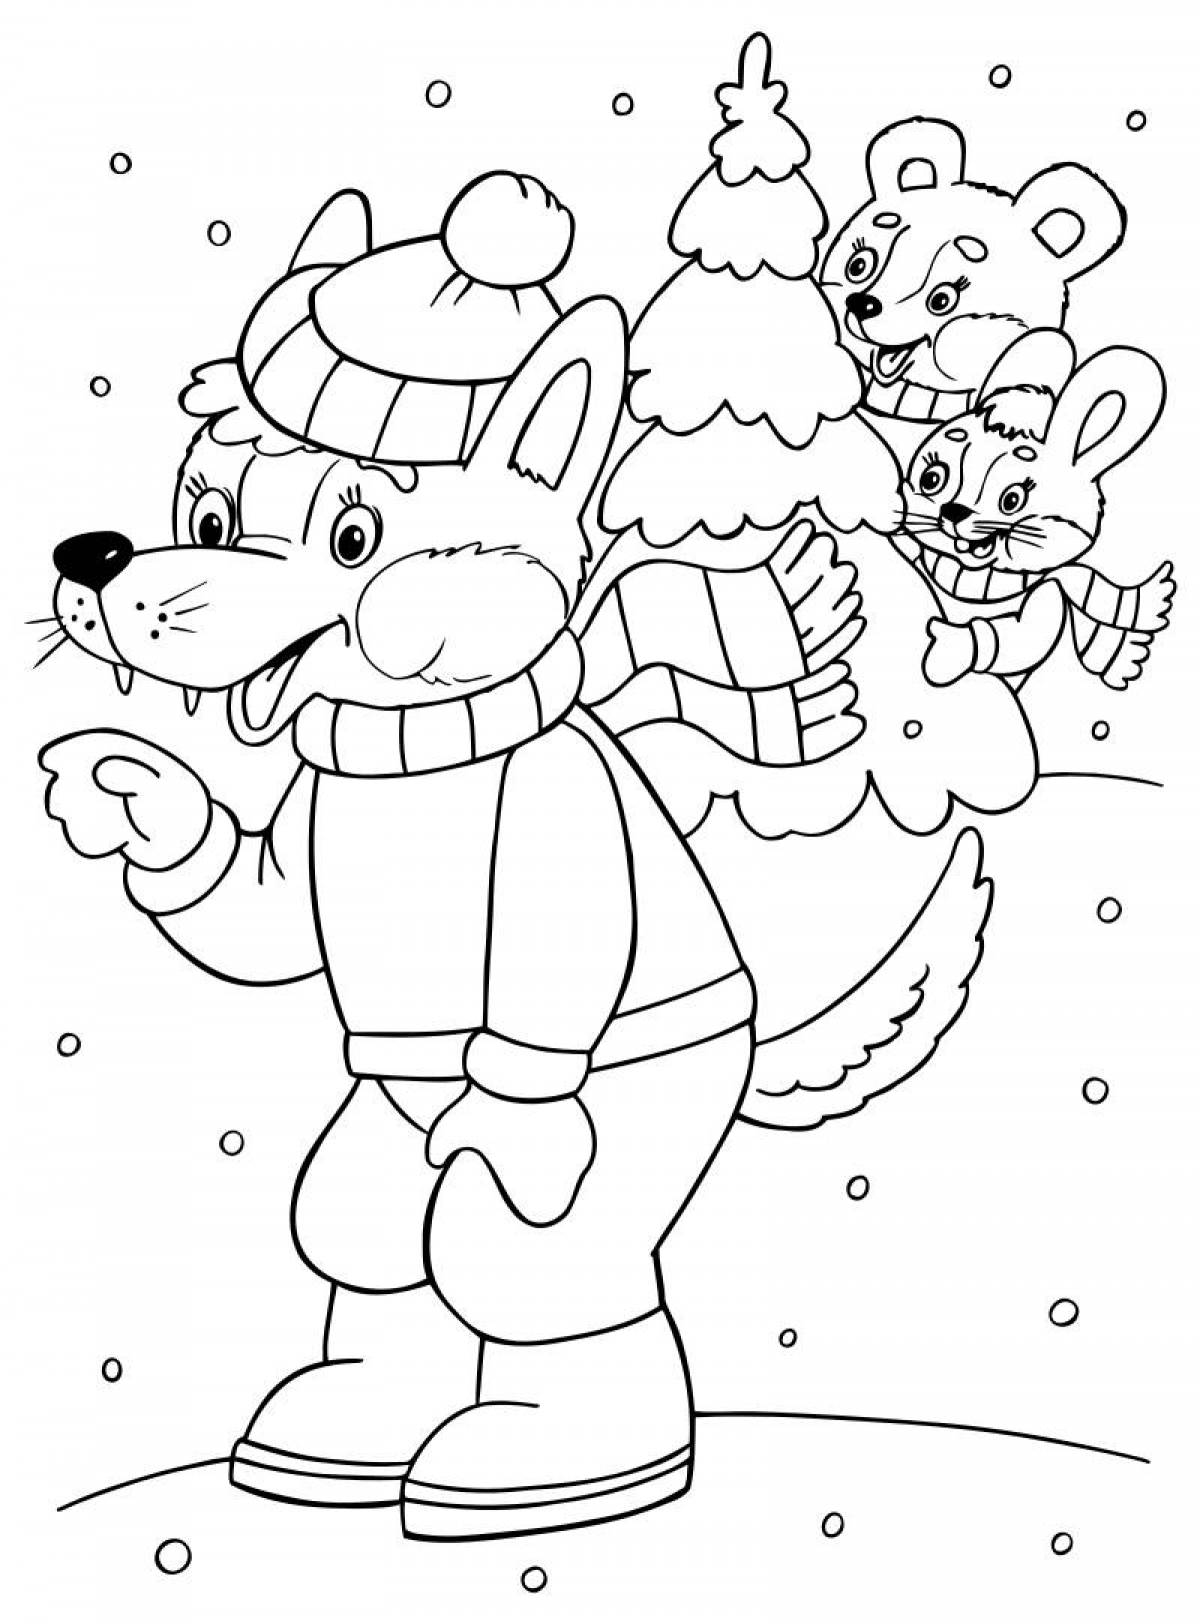 Radiant Christmas coloring book for boys